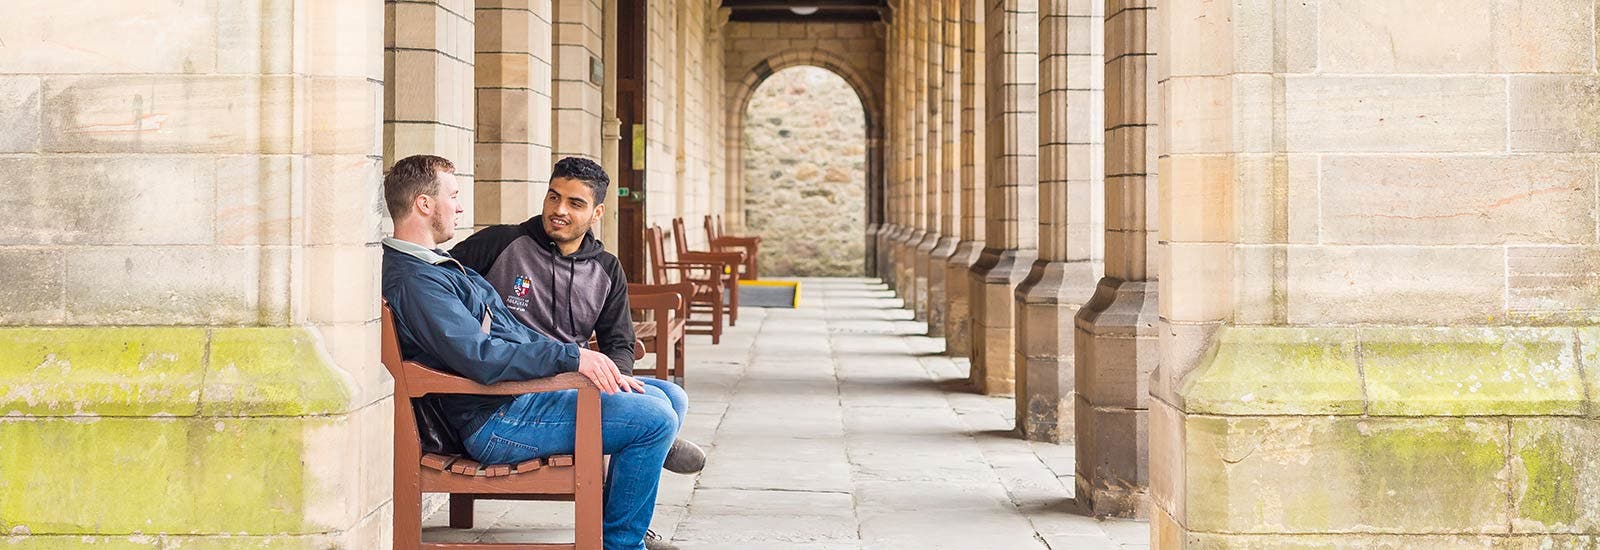 Students talking on bench on Aberdeen campus